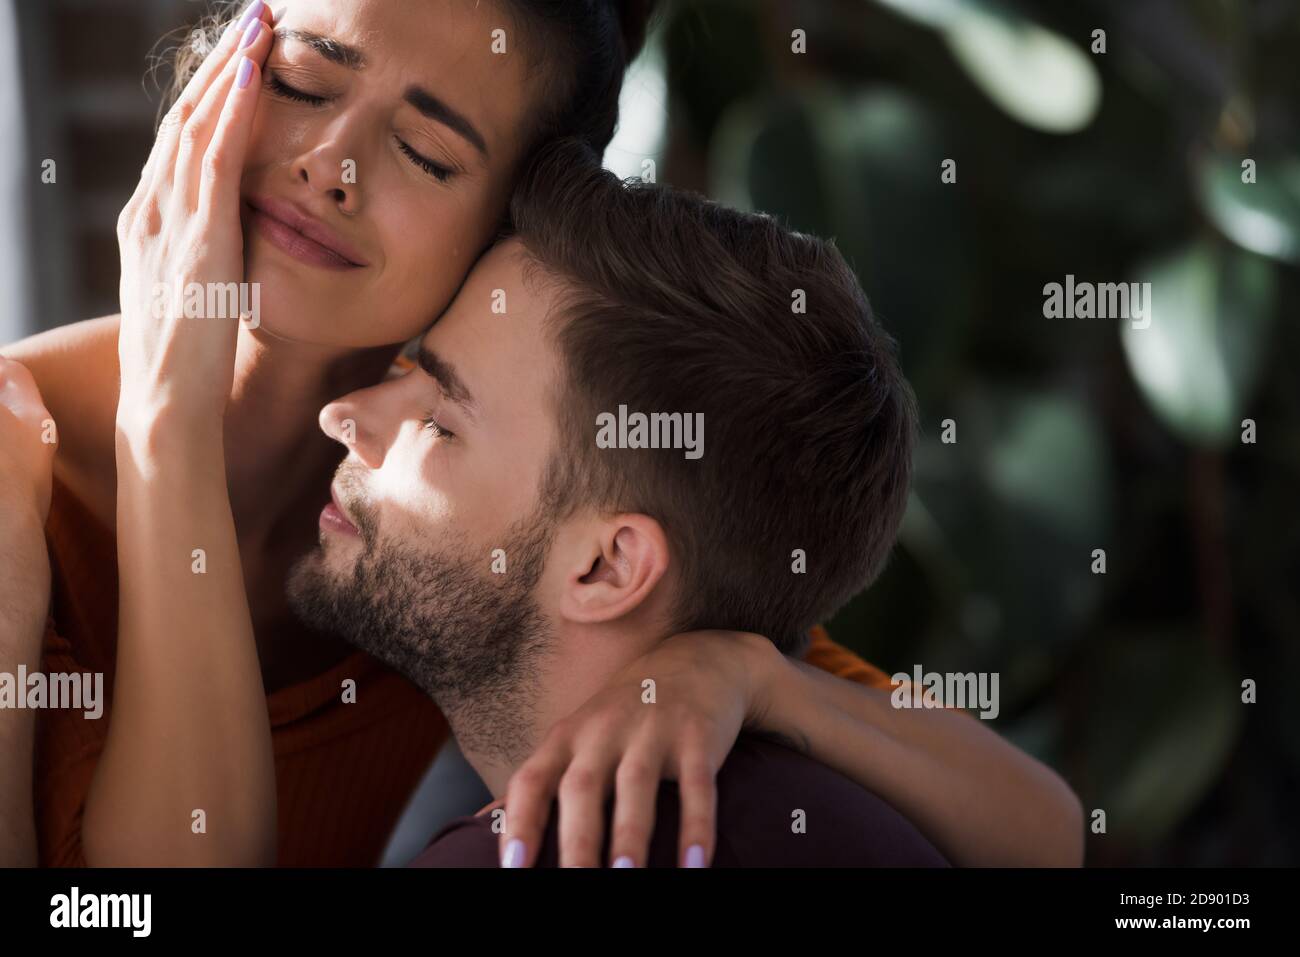 crying woman touching face while embracing beloved man at home Stock Photo